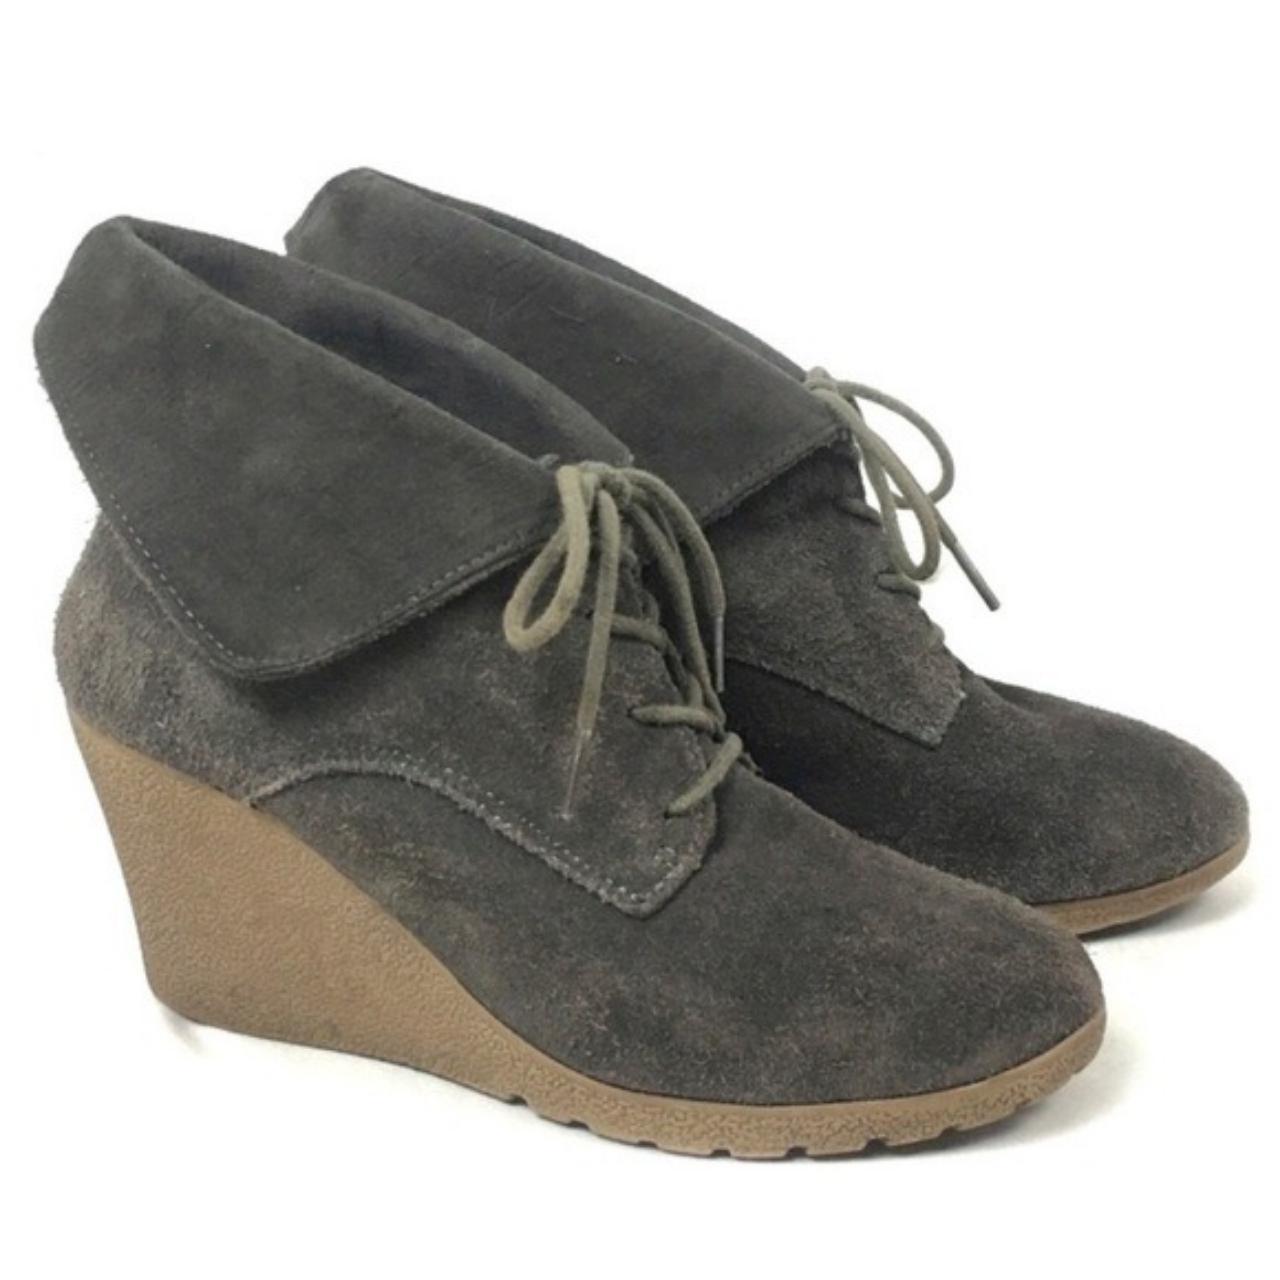 Product Image 1 - Gently worn MIA ankle boots.